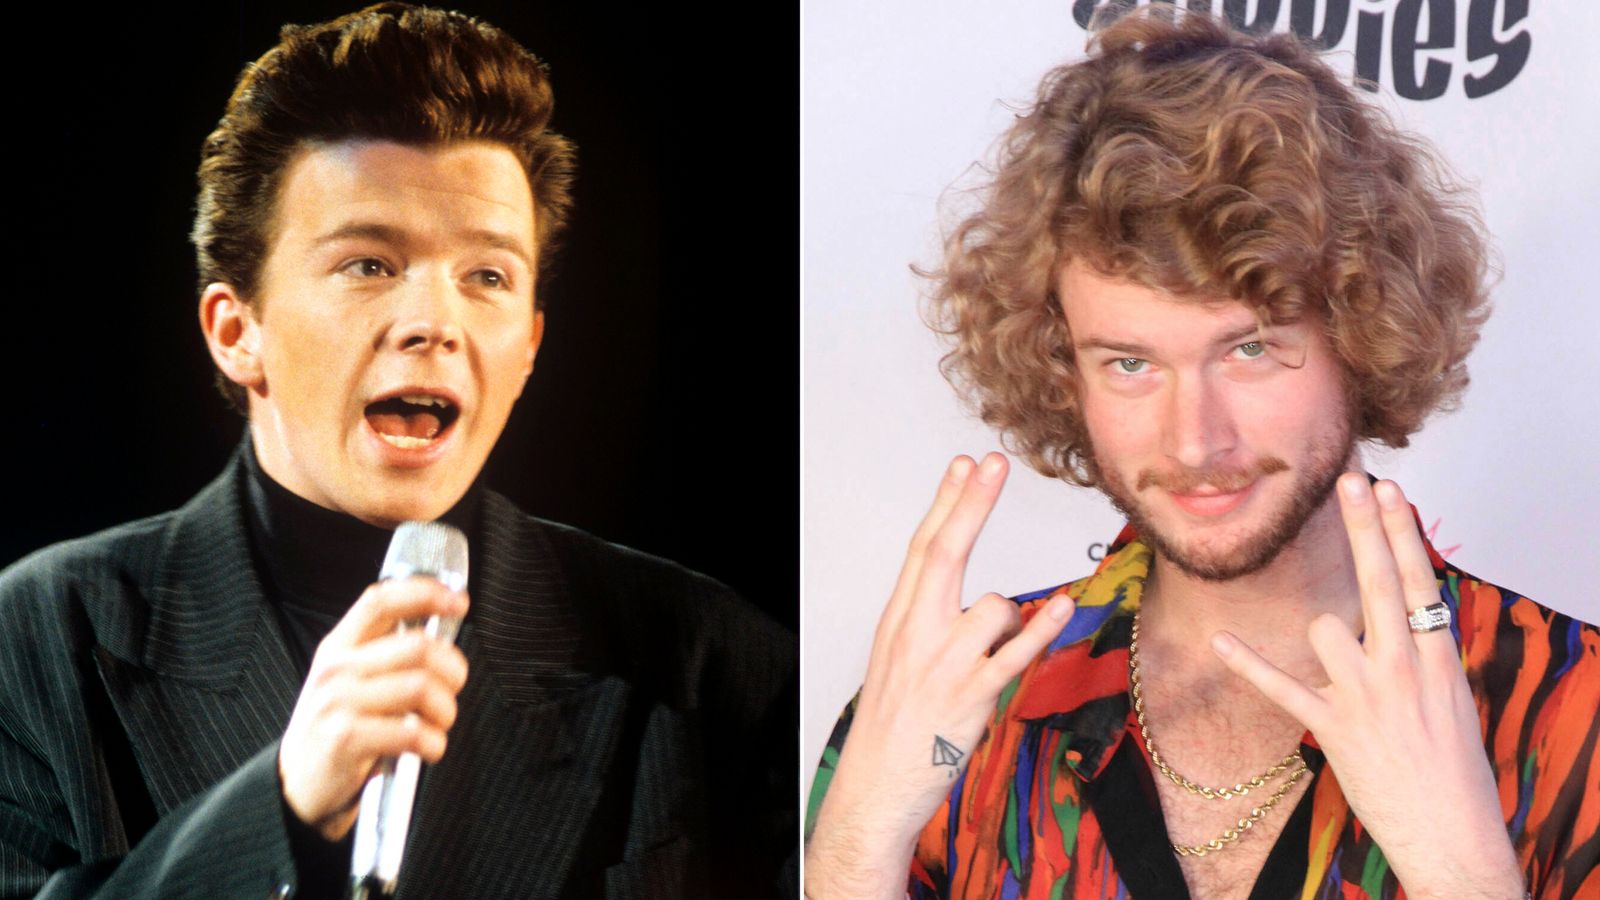 Why is Rick Astley suing rapper Yung Gravy?